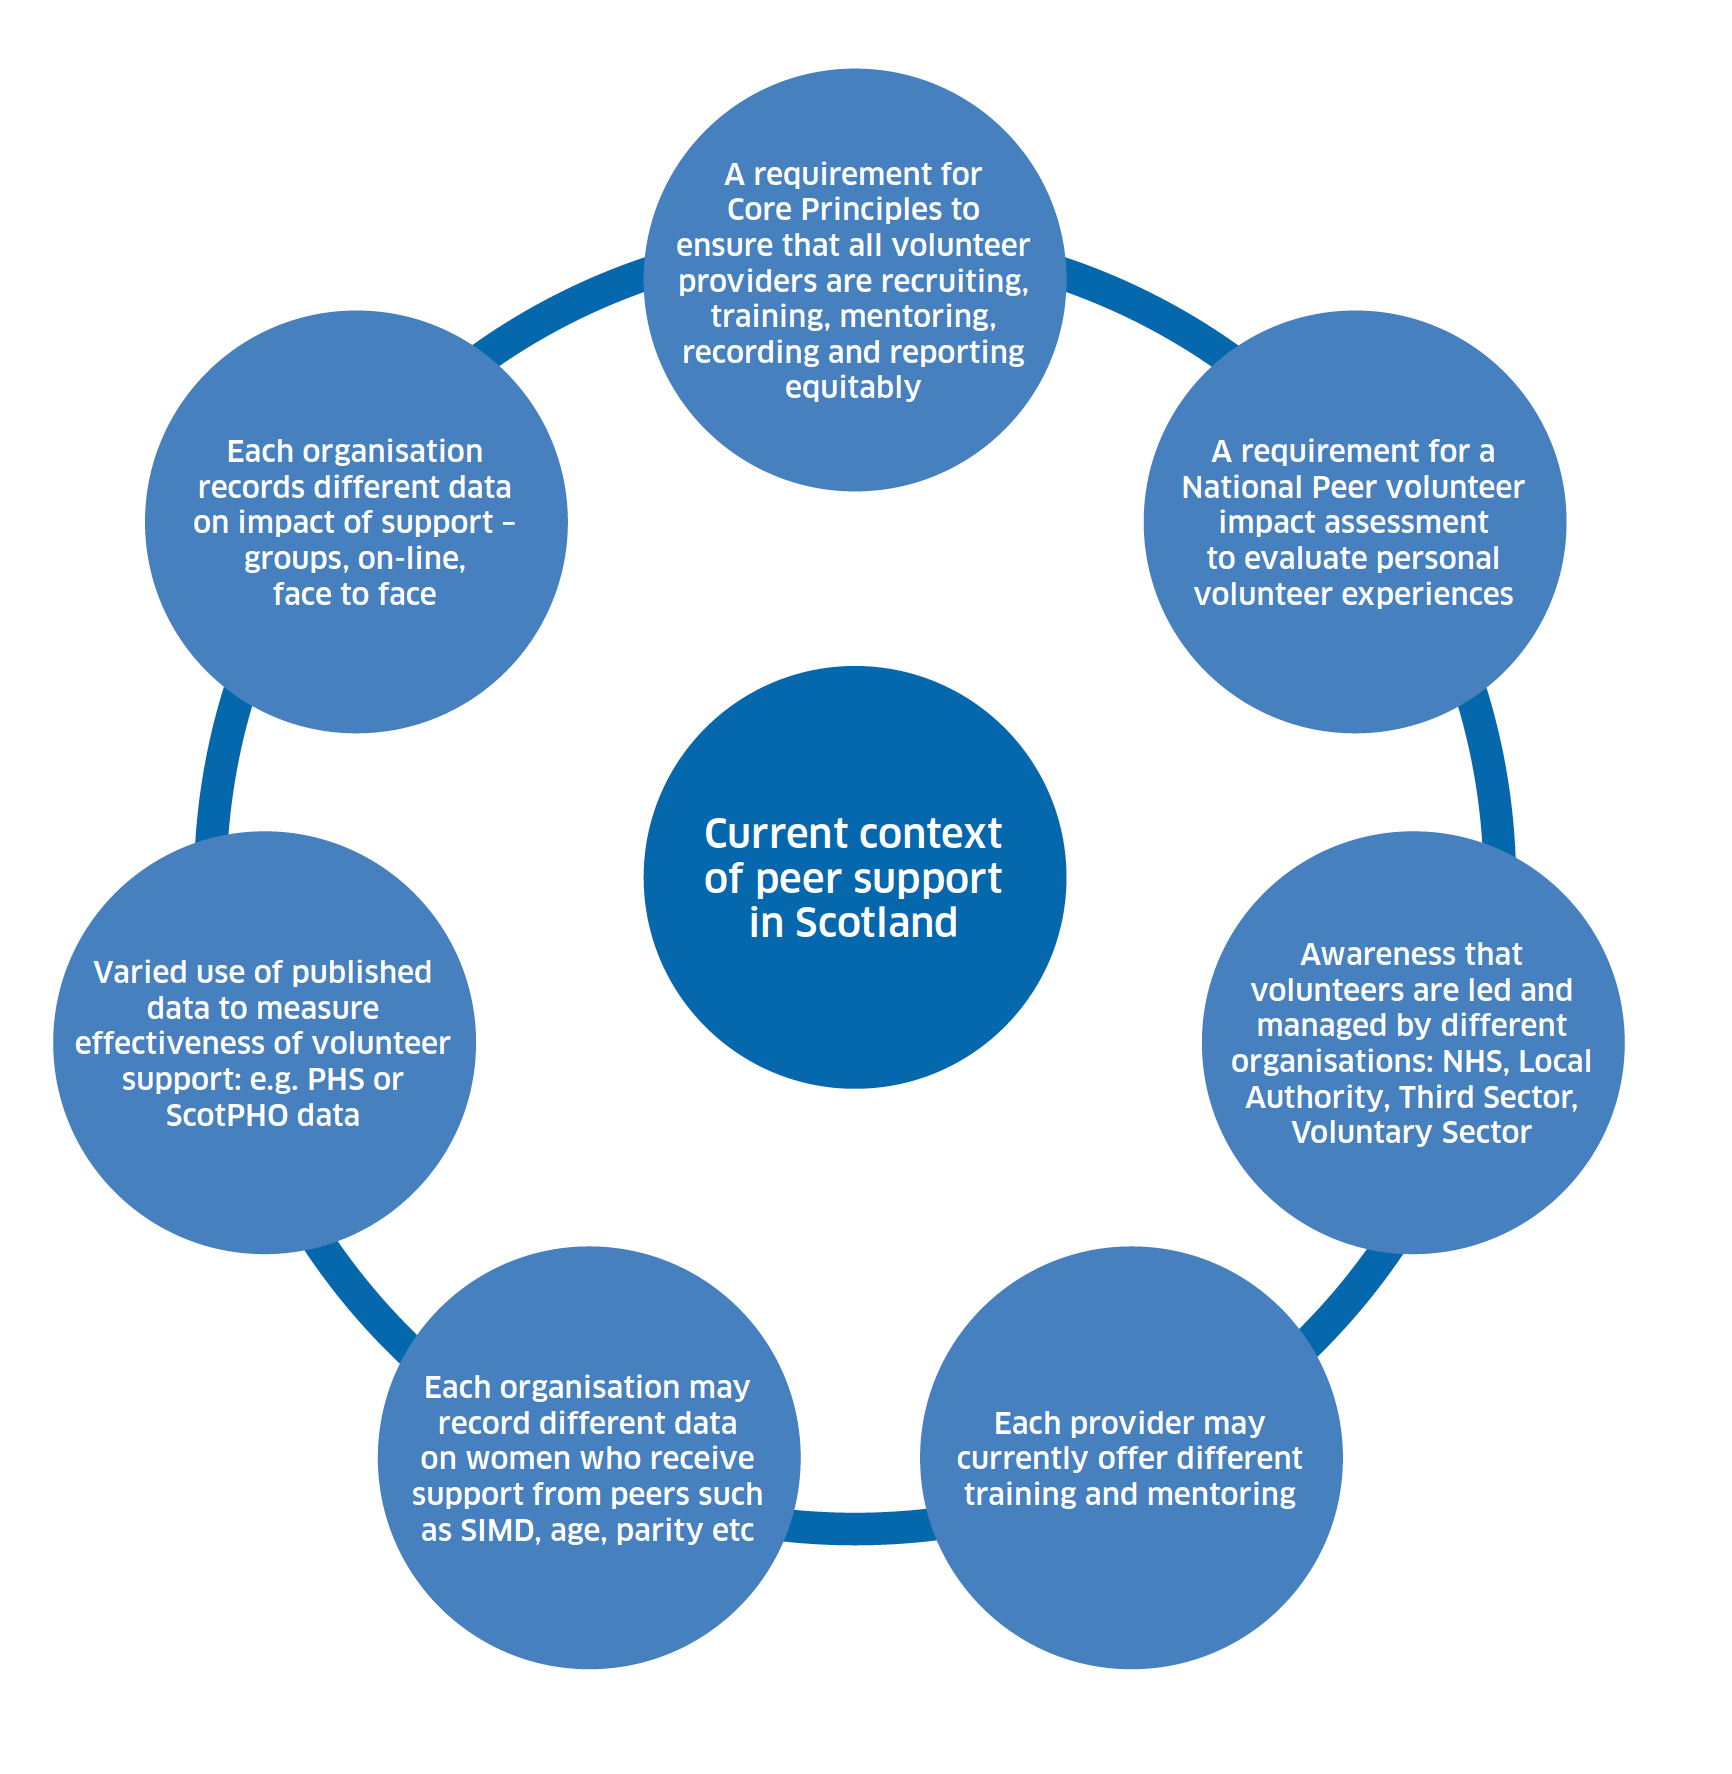 Breastfeeding peer support improvement and sustainability model - showing the current context in Scotland and what the advisory groups considered to be the issues which needed to be addressed to deliver a service which was equitable in terms of recruitment, training and supervision and able to evidence outcomes and improvement.